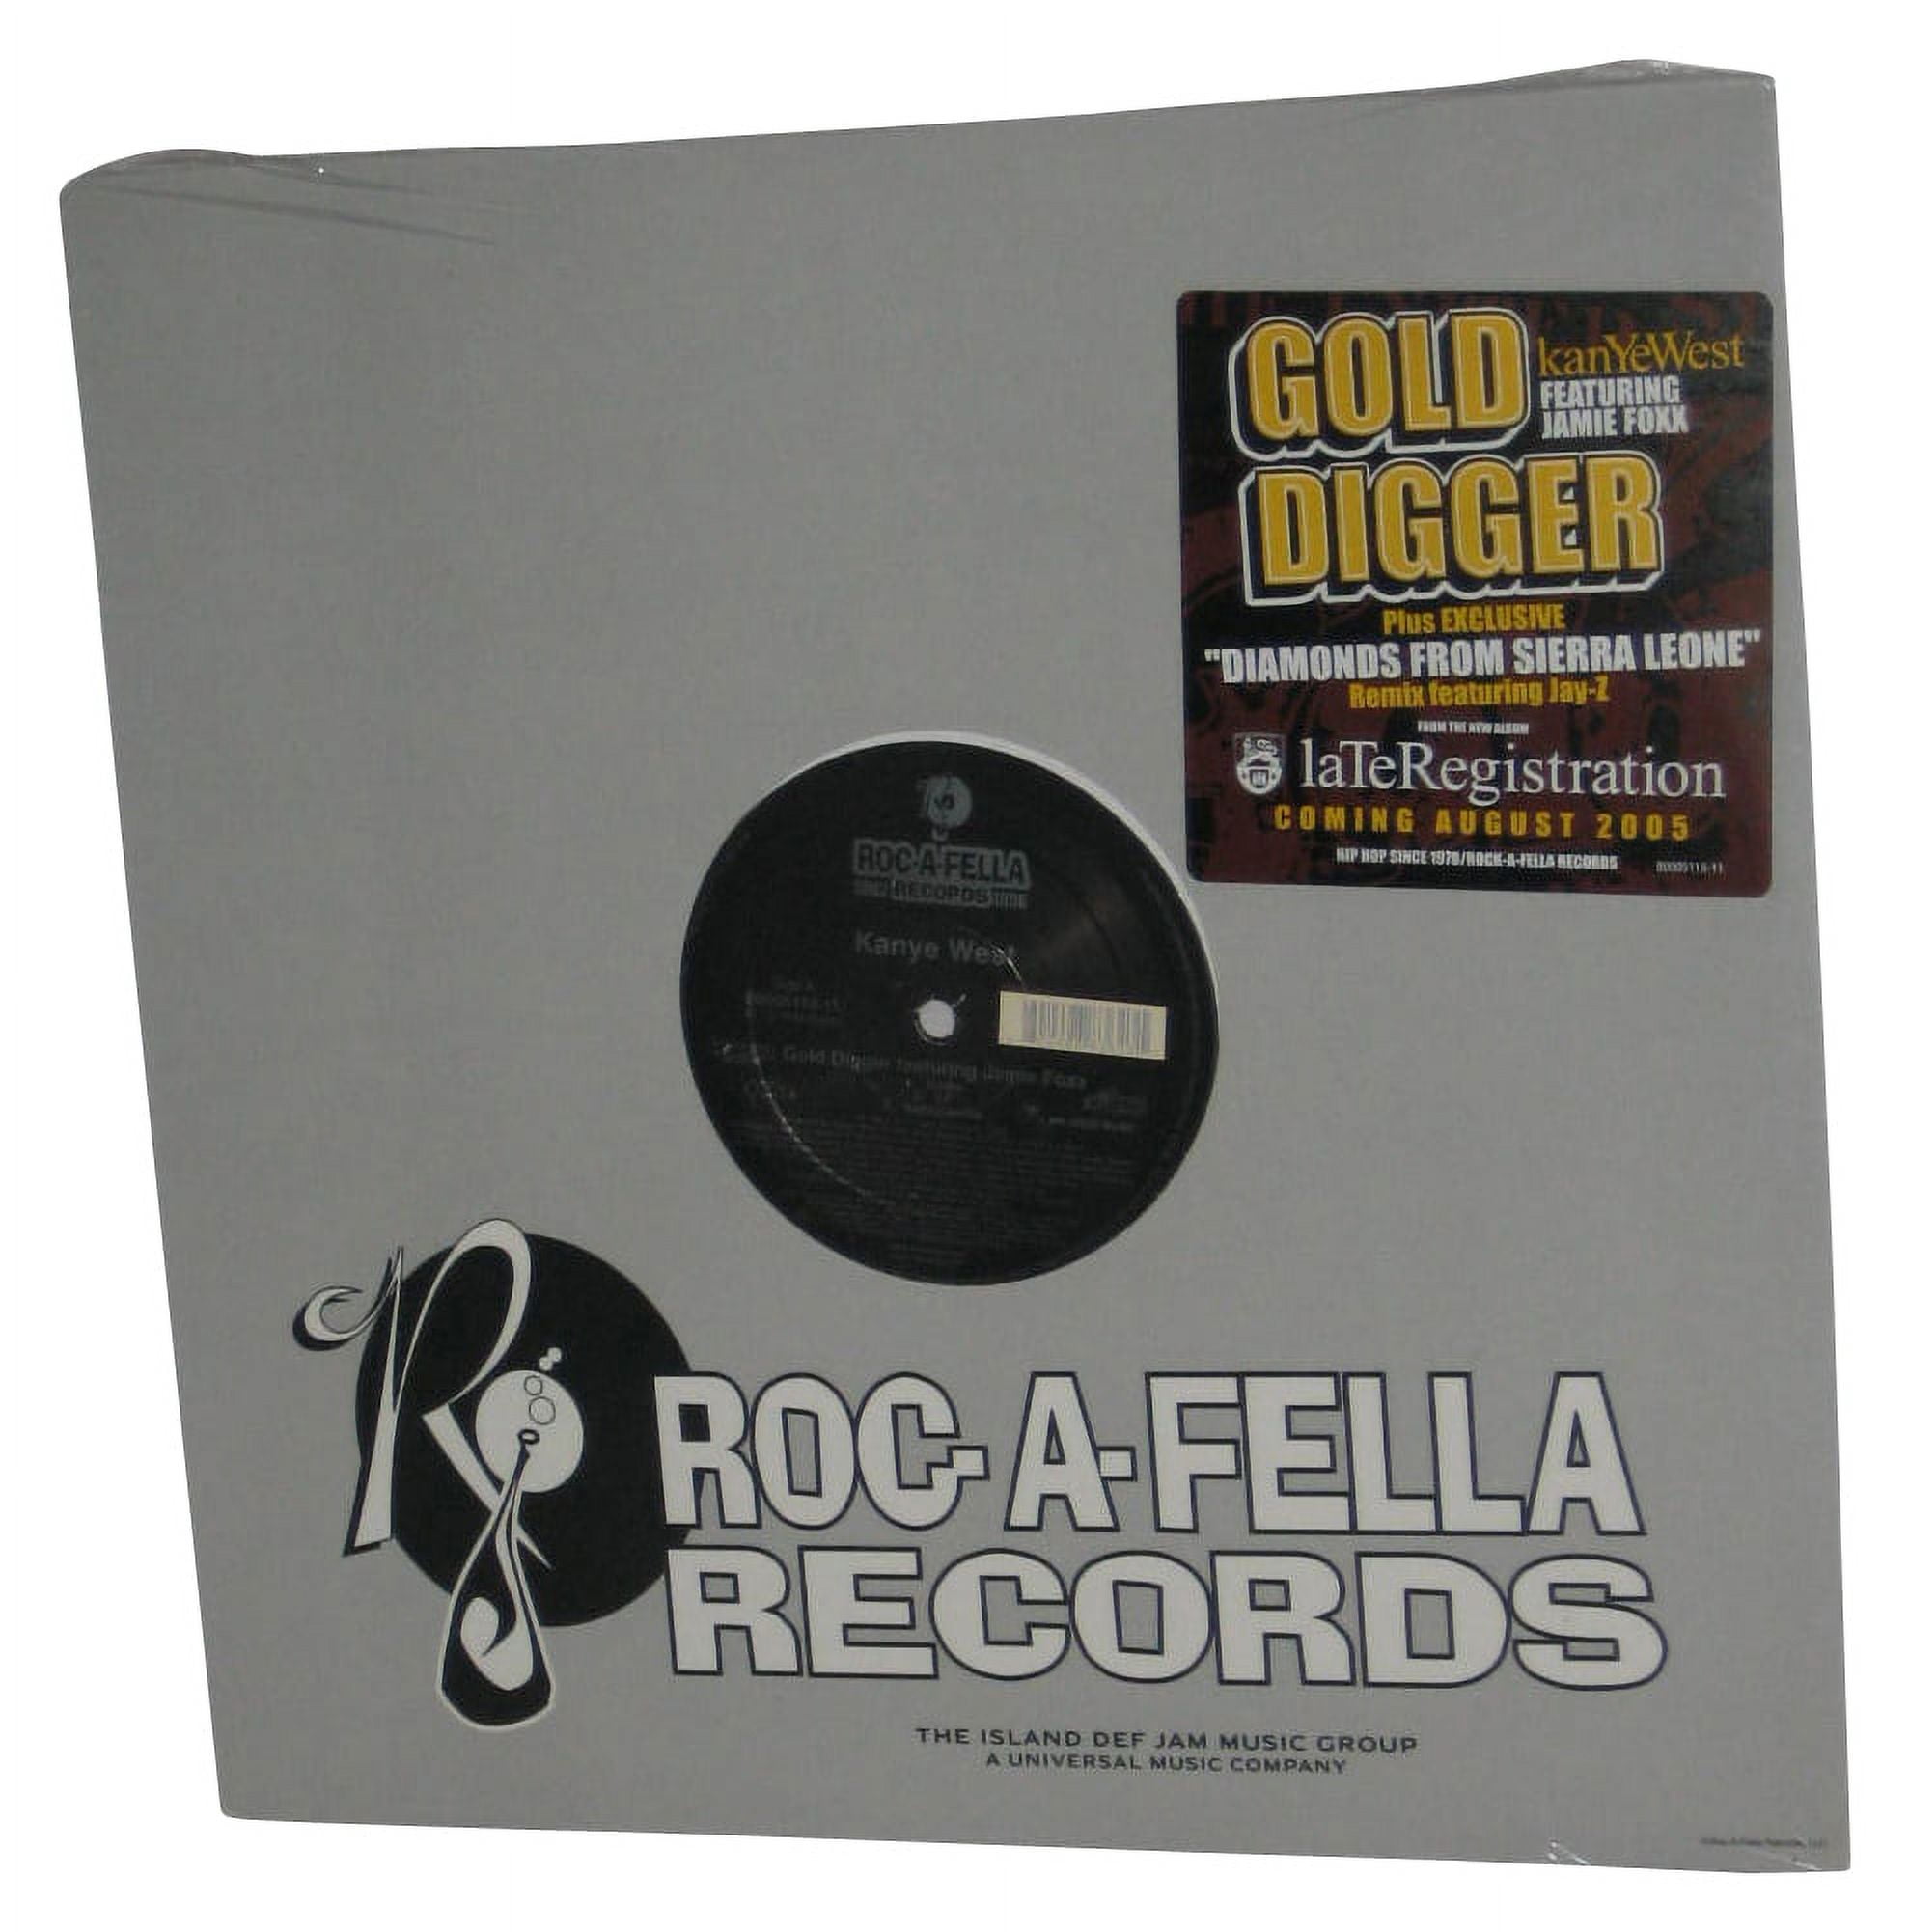 Kanye West feat Jamie Foxx & Jay-Z : Gold Digger (radio, LP, inst)/Diamonds  From Sierra Leone (rmx) (radio, LP, inst) (12-inch, Vinyl record) -- Dusty  Groove is Chicago's Online Record Store